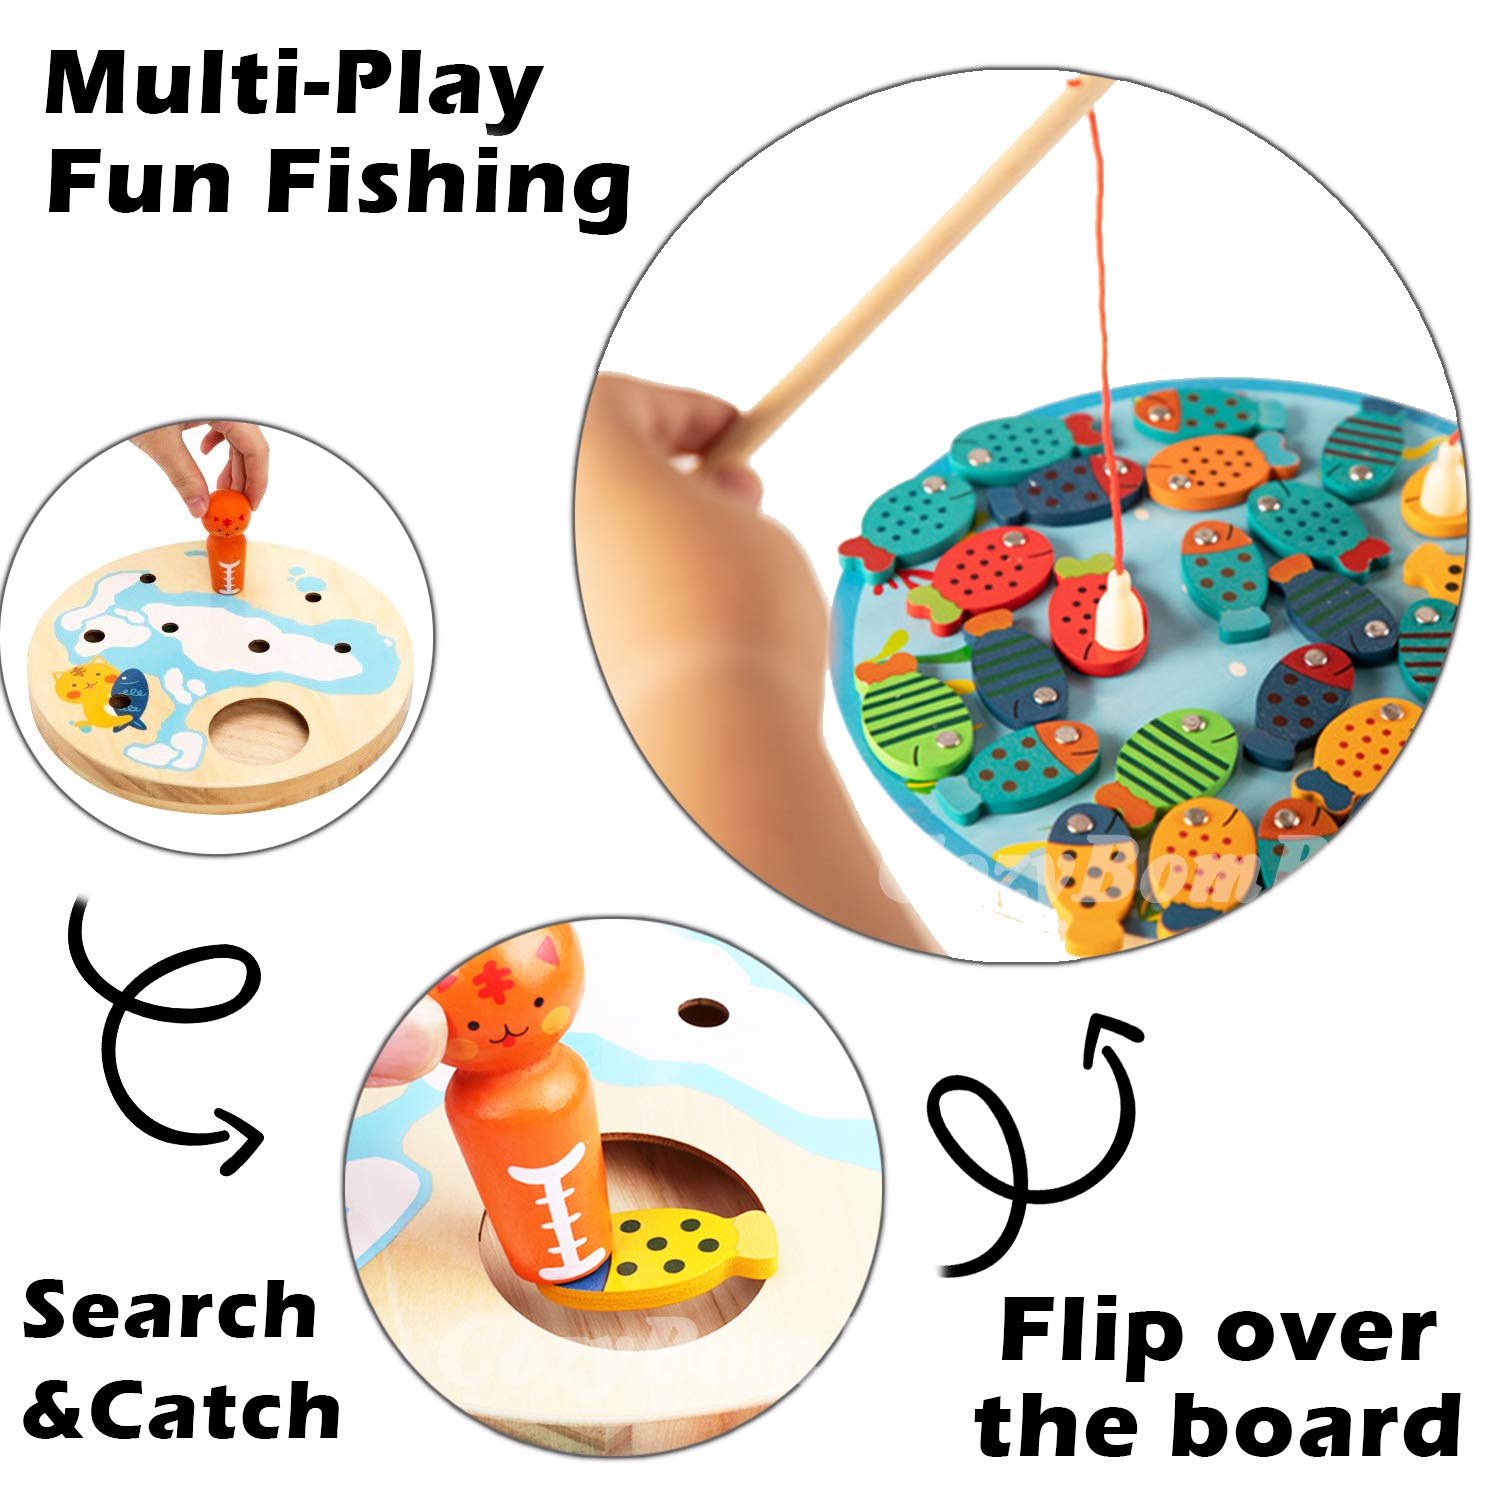 Make a Homemade Magnetic Fishing Game - Blissfully Domestic